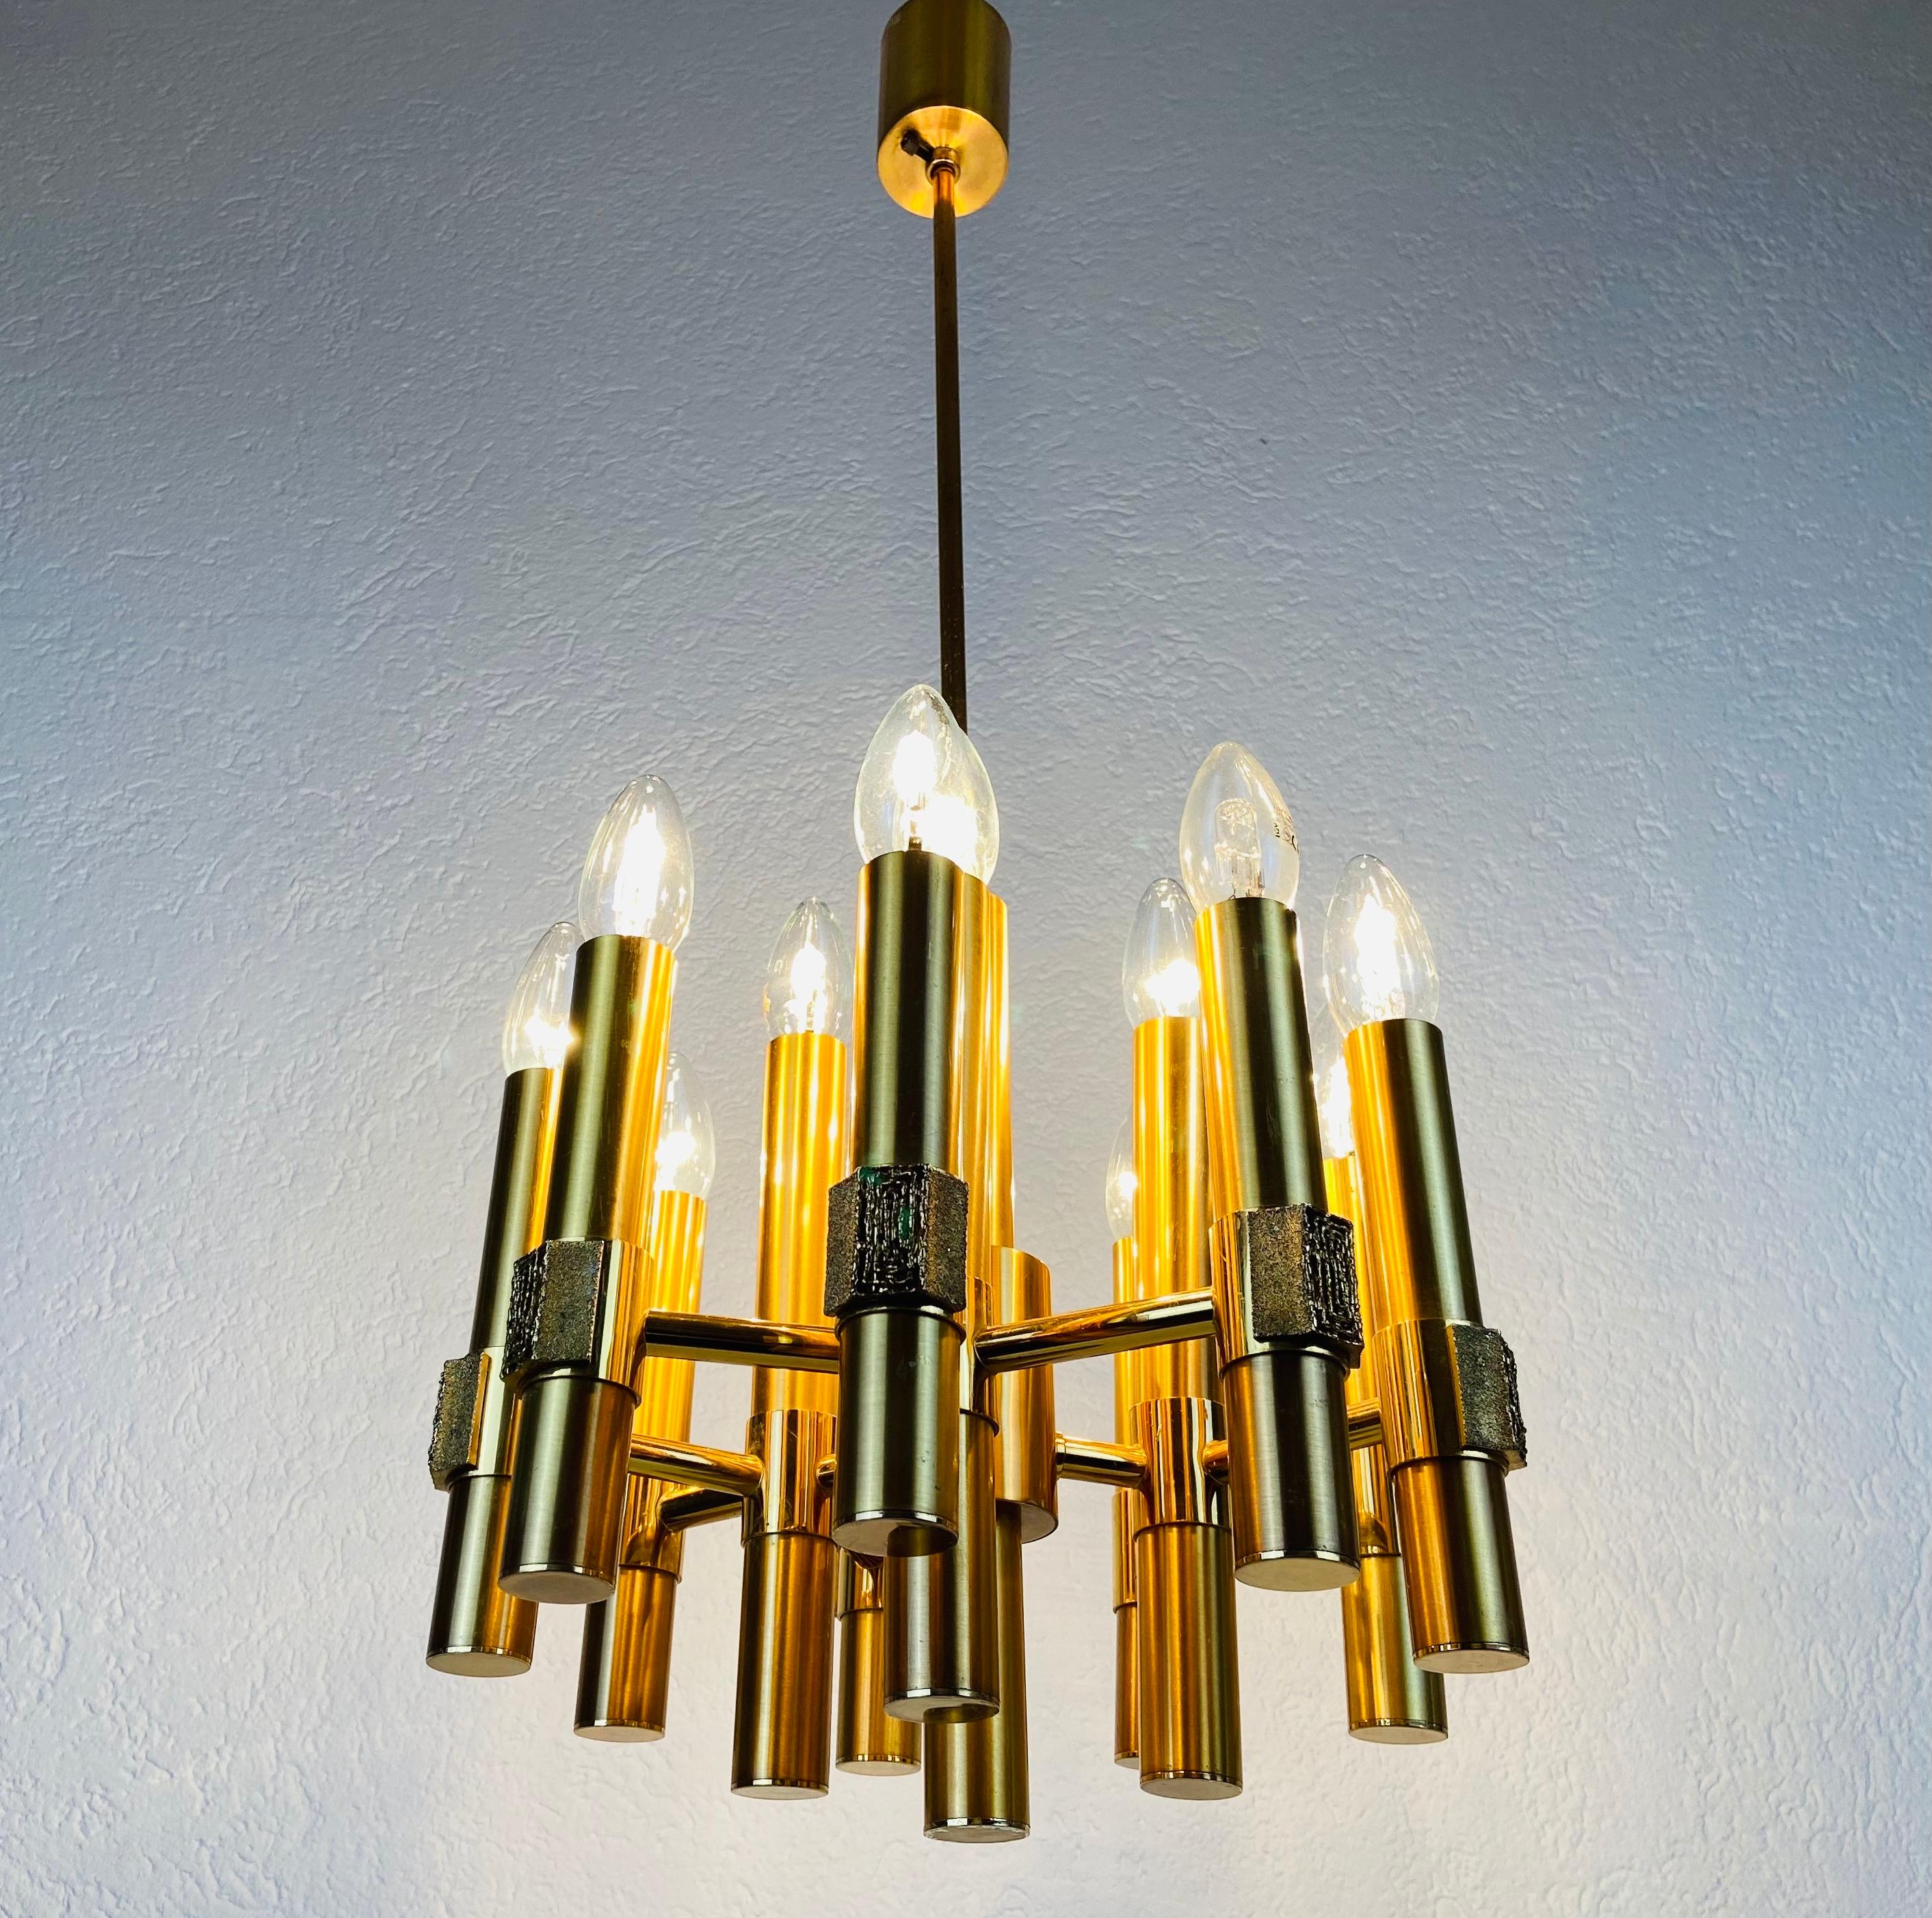 An extraordinary chandelier made in Italy by Angelo Brotto in the 1960s. It is fascinating with its 12 amazing arms. The body is made of full brass and has a very elegant style. 

The light requires 12 E14 light bulbs. Works with both 120/220V. Good